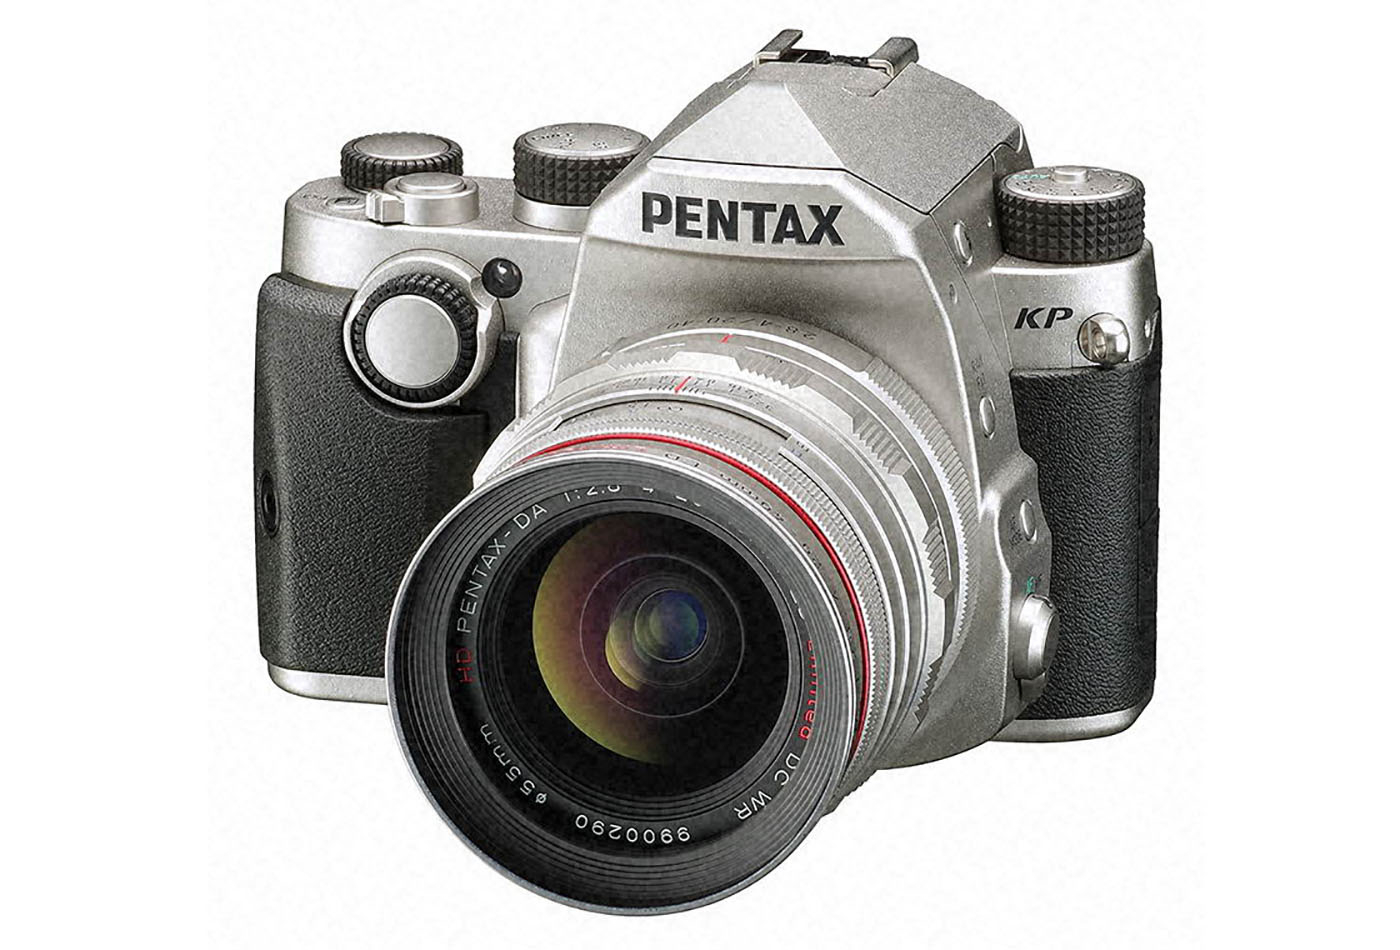 Pentax announces new DSLR – Pentax KP, capable of shooting at ISO 819000